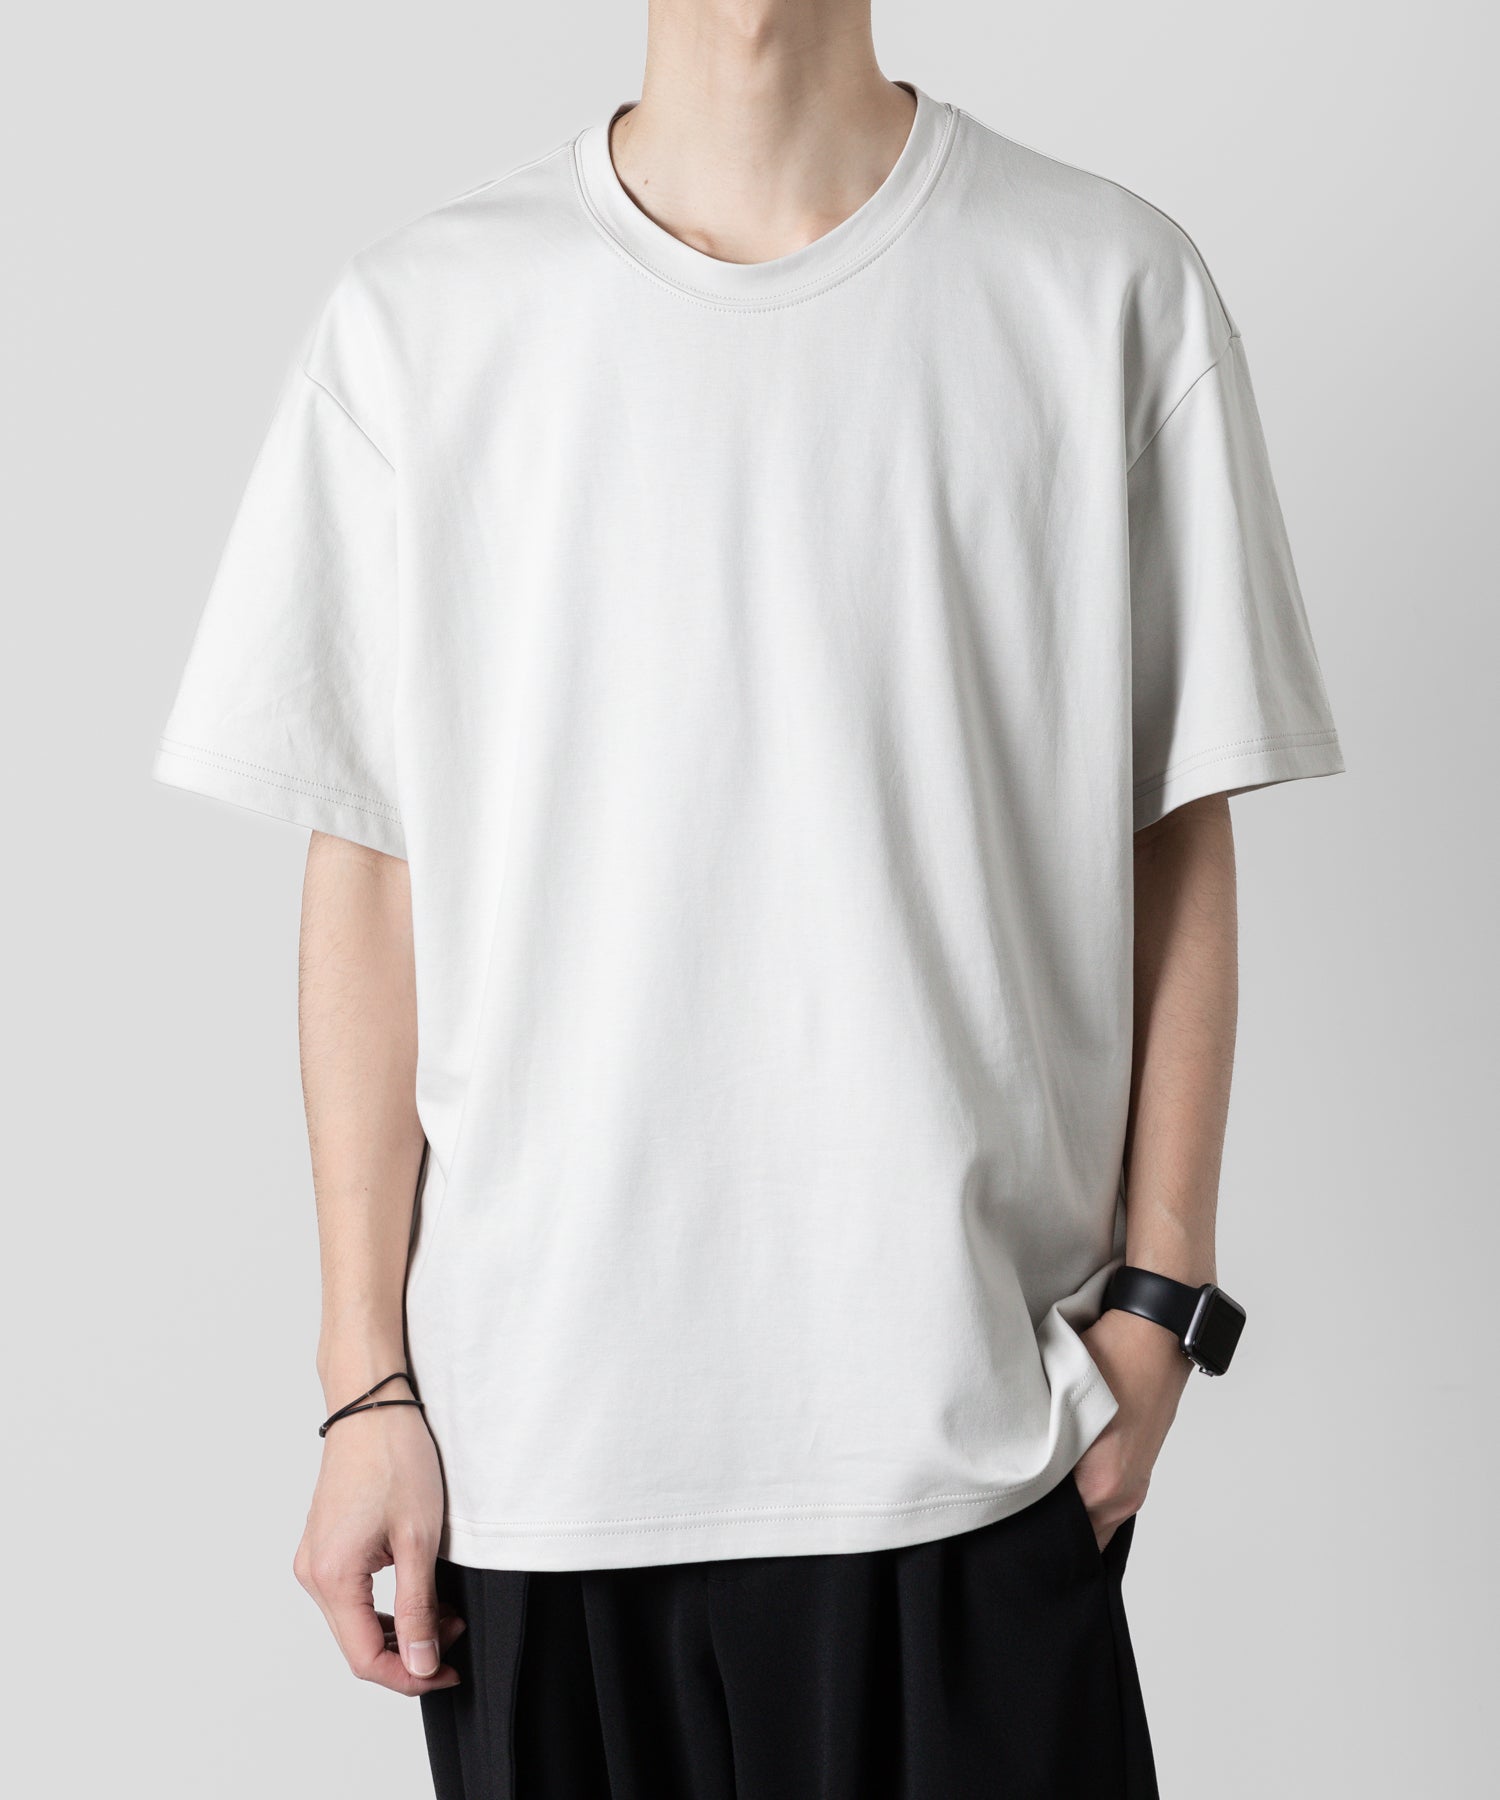 【ATTACHMENT】ATTACHMENT アタッチメントのCOTTON DOUBLE FACE OVERSIZED S/S TEE - L.GRAY 公式通販サイトsession福岡セレクトショップ